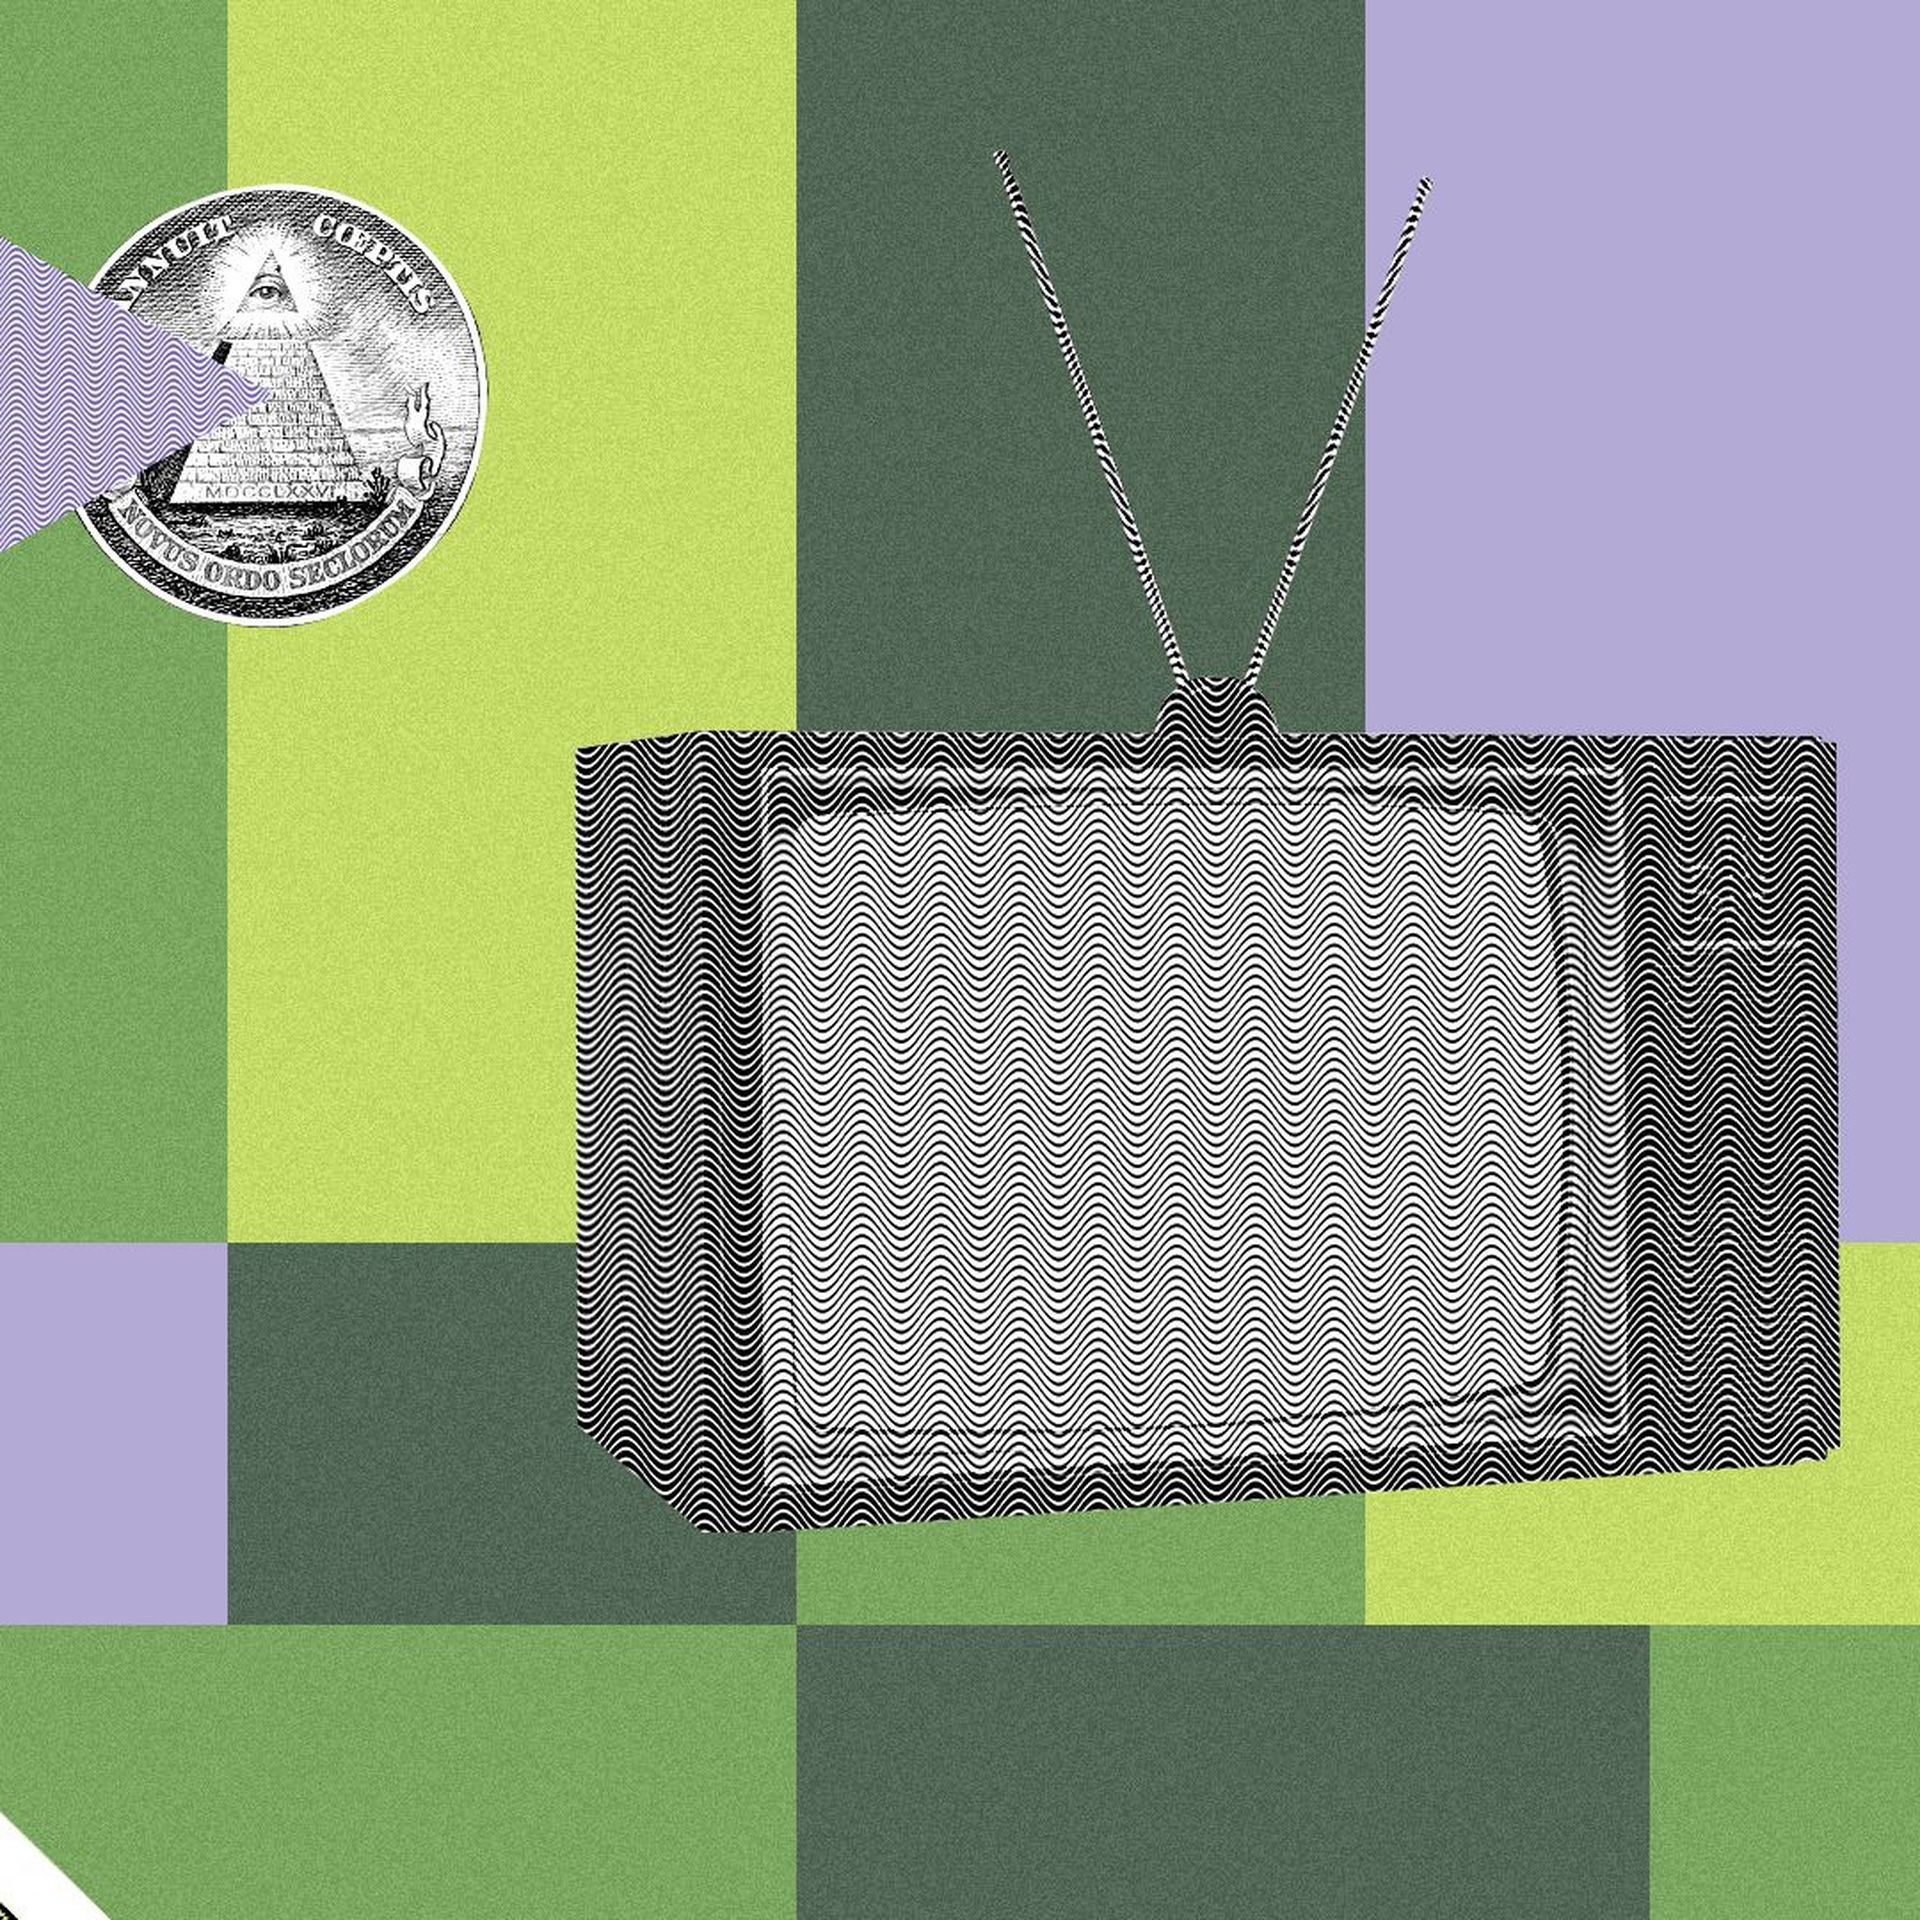 Illustration of a collage featuring an old TV, parts of dollar bills, and a TV test pattern.